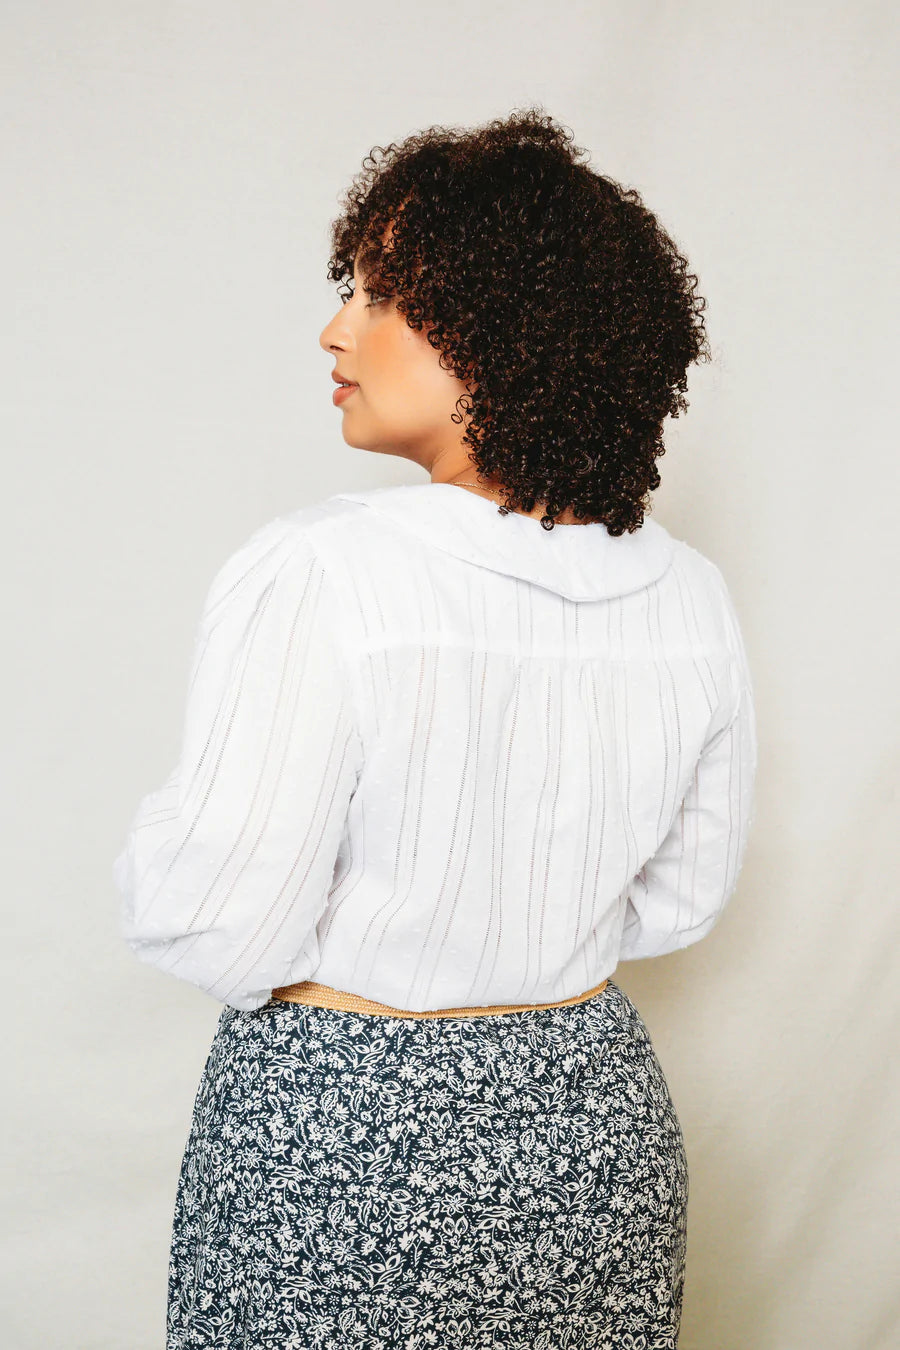 FRIDAY Pattern Co - the Patina Blouse Sewing Pattern